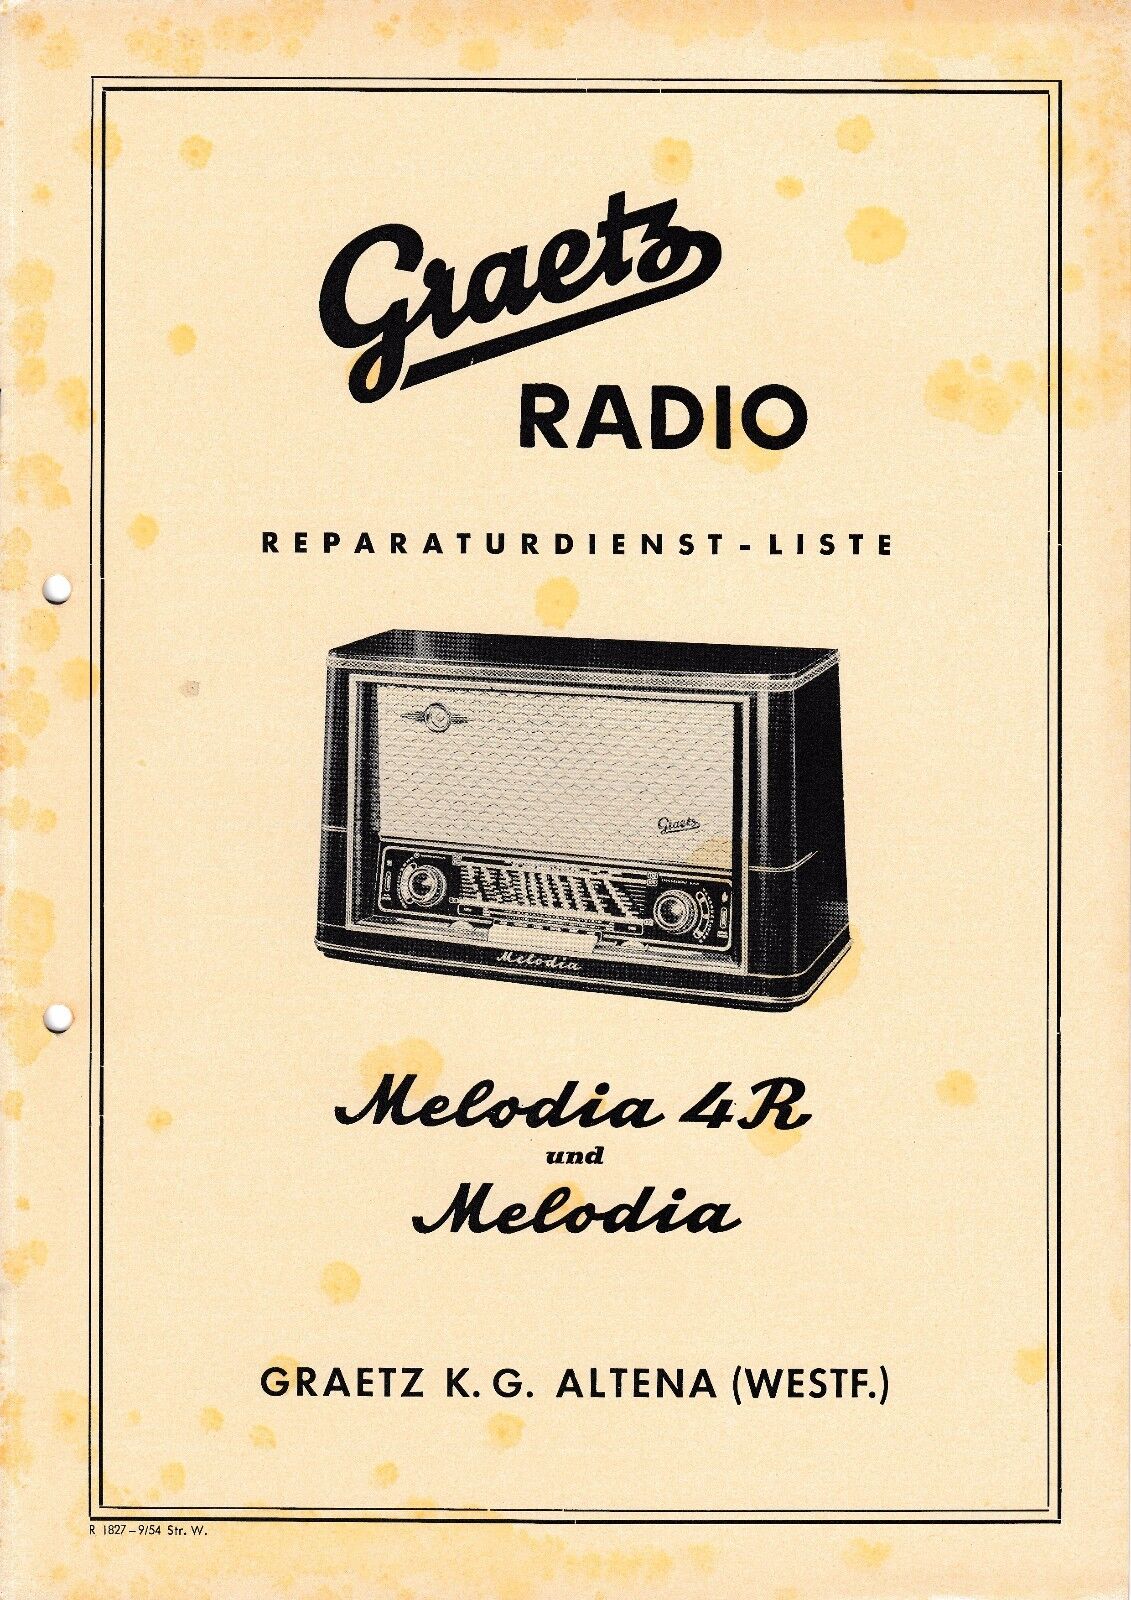 Service Manual Instructions for Graetz Melodia 4 R, Melodia